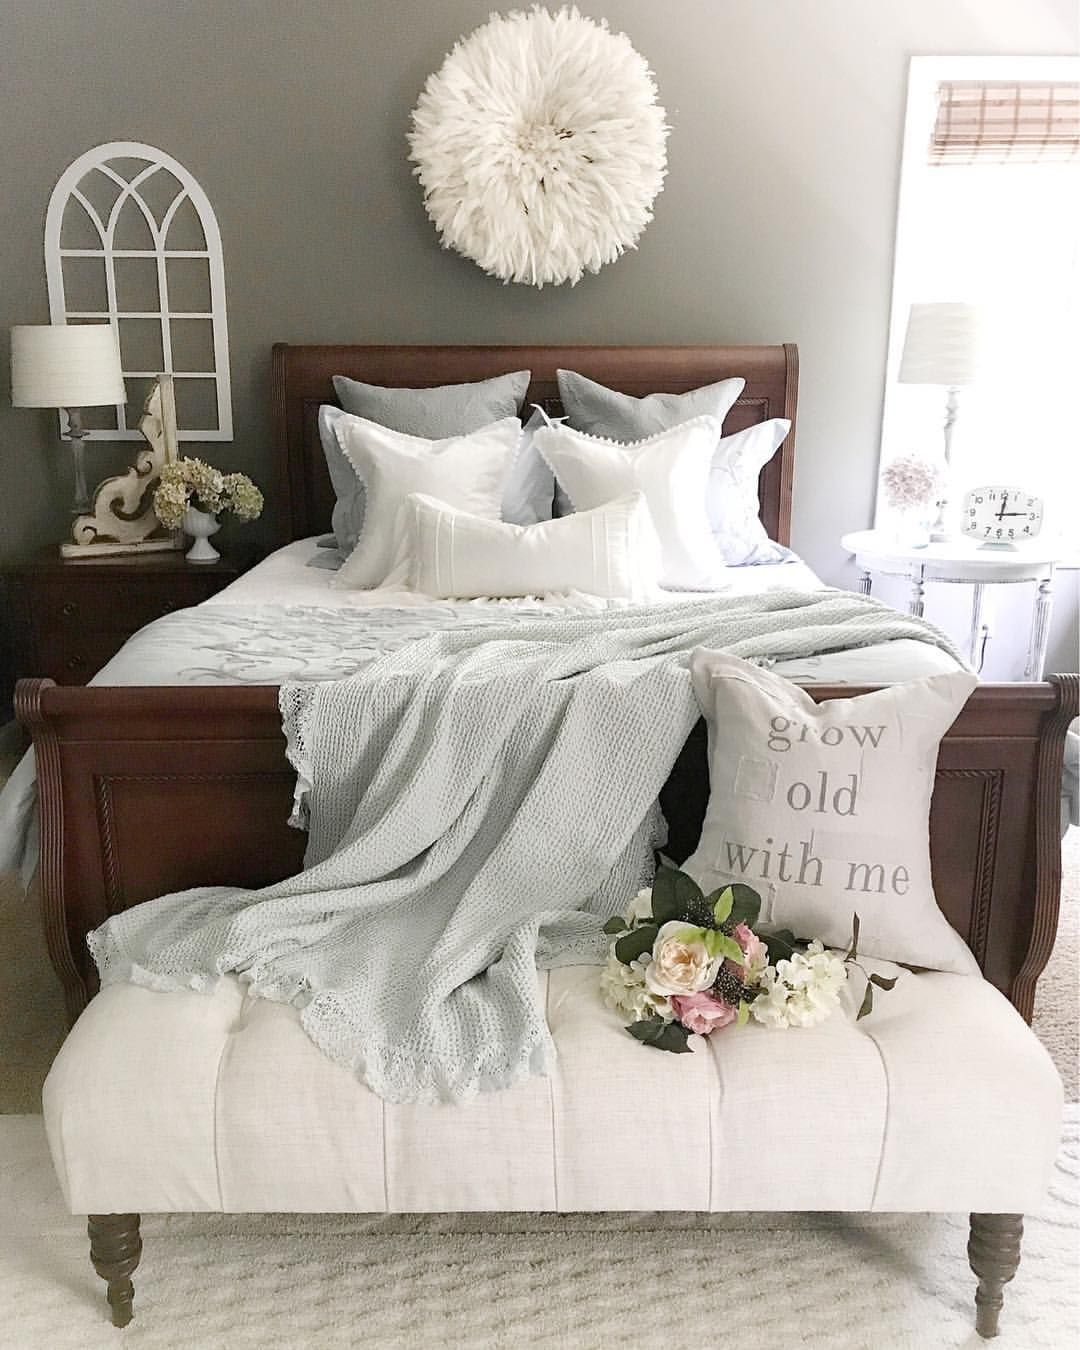 Pamela |Home On Fern Hill on Instagram: “Happy Thursday friends!! Sharing this beautiful waffle weave matelasse throw from @purplerosehome.  I love the detail , especially the lace…”